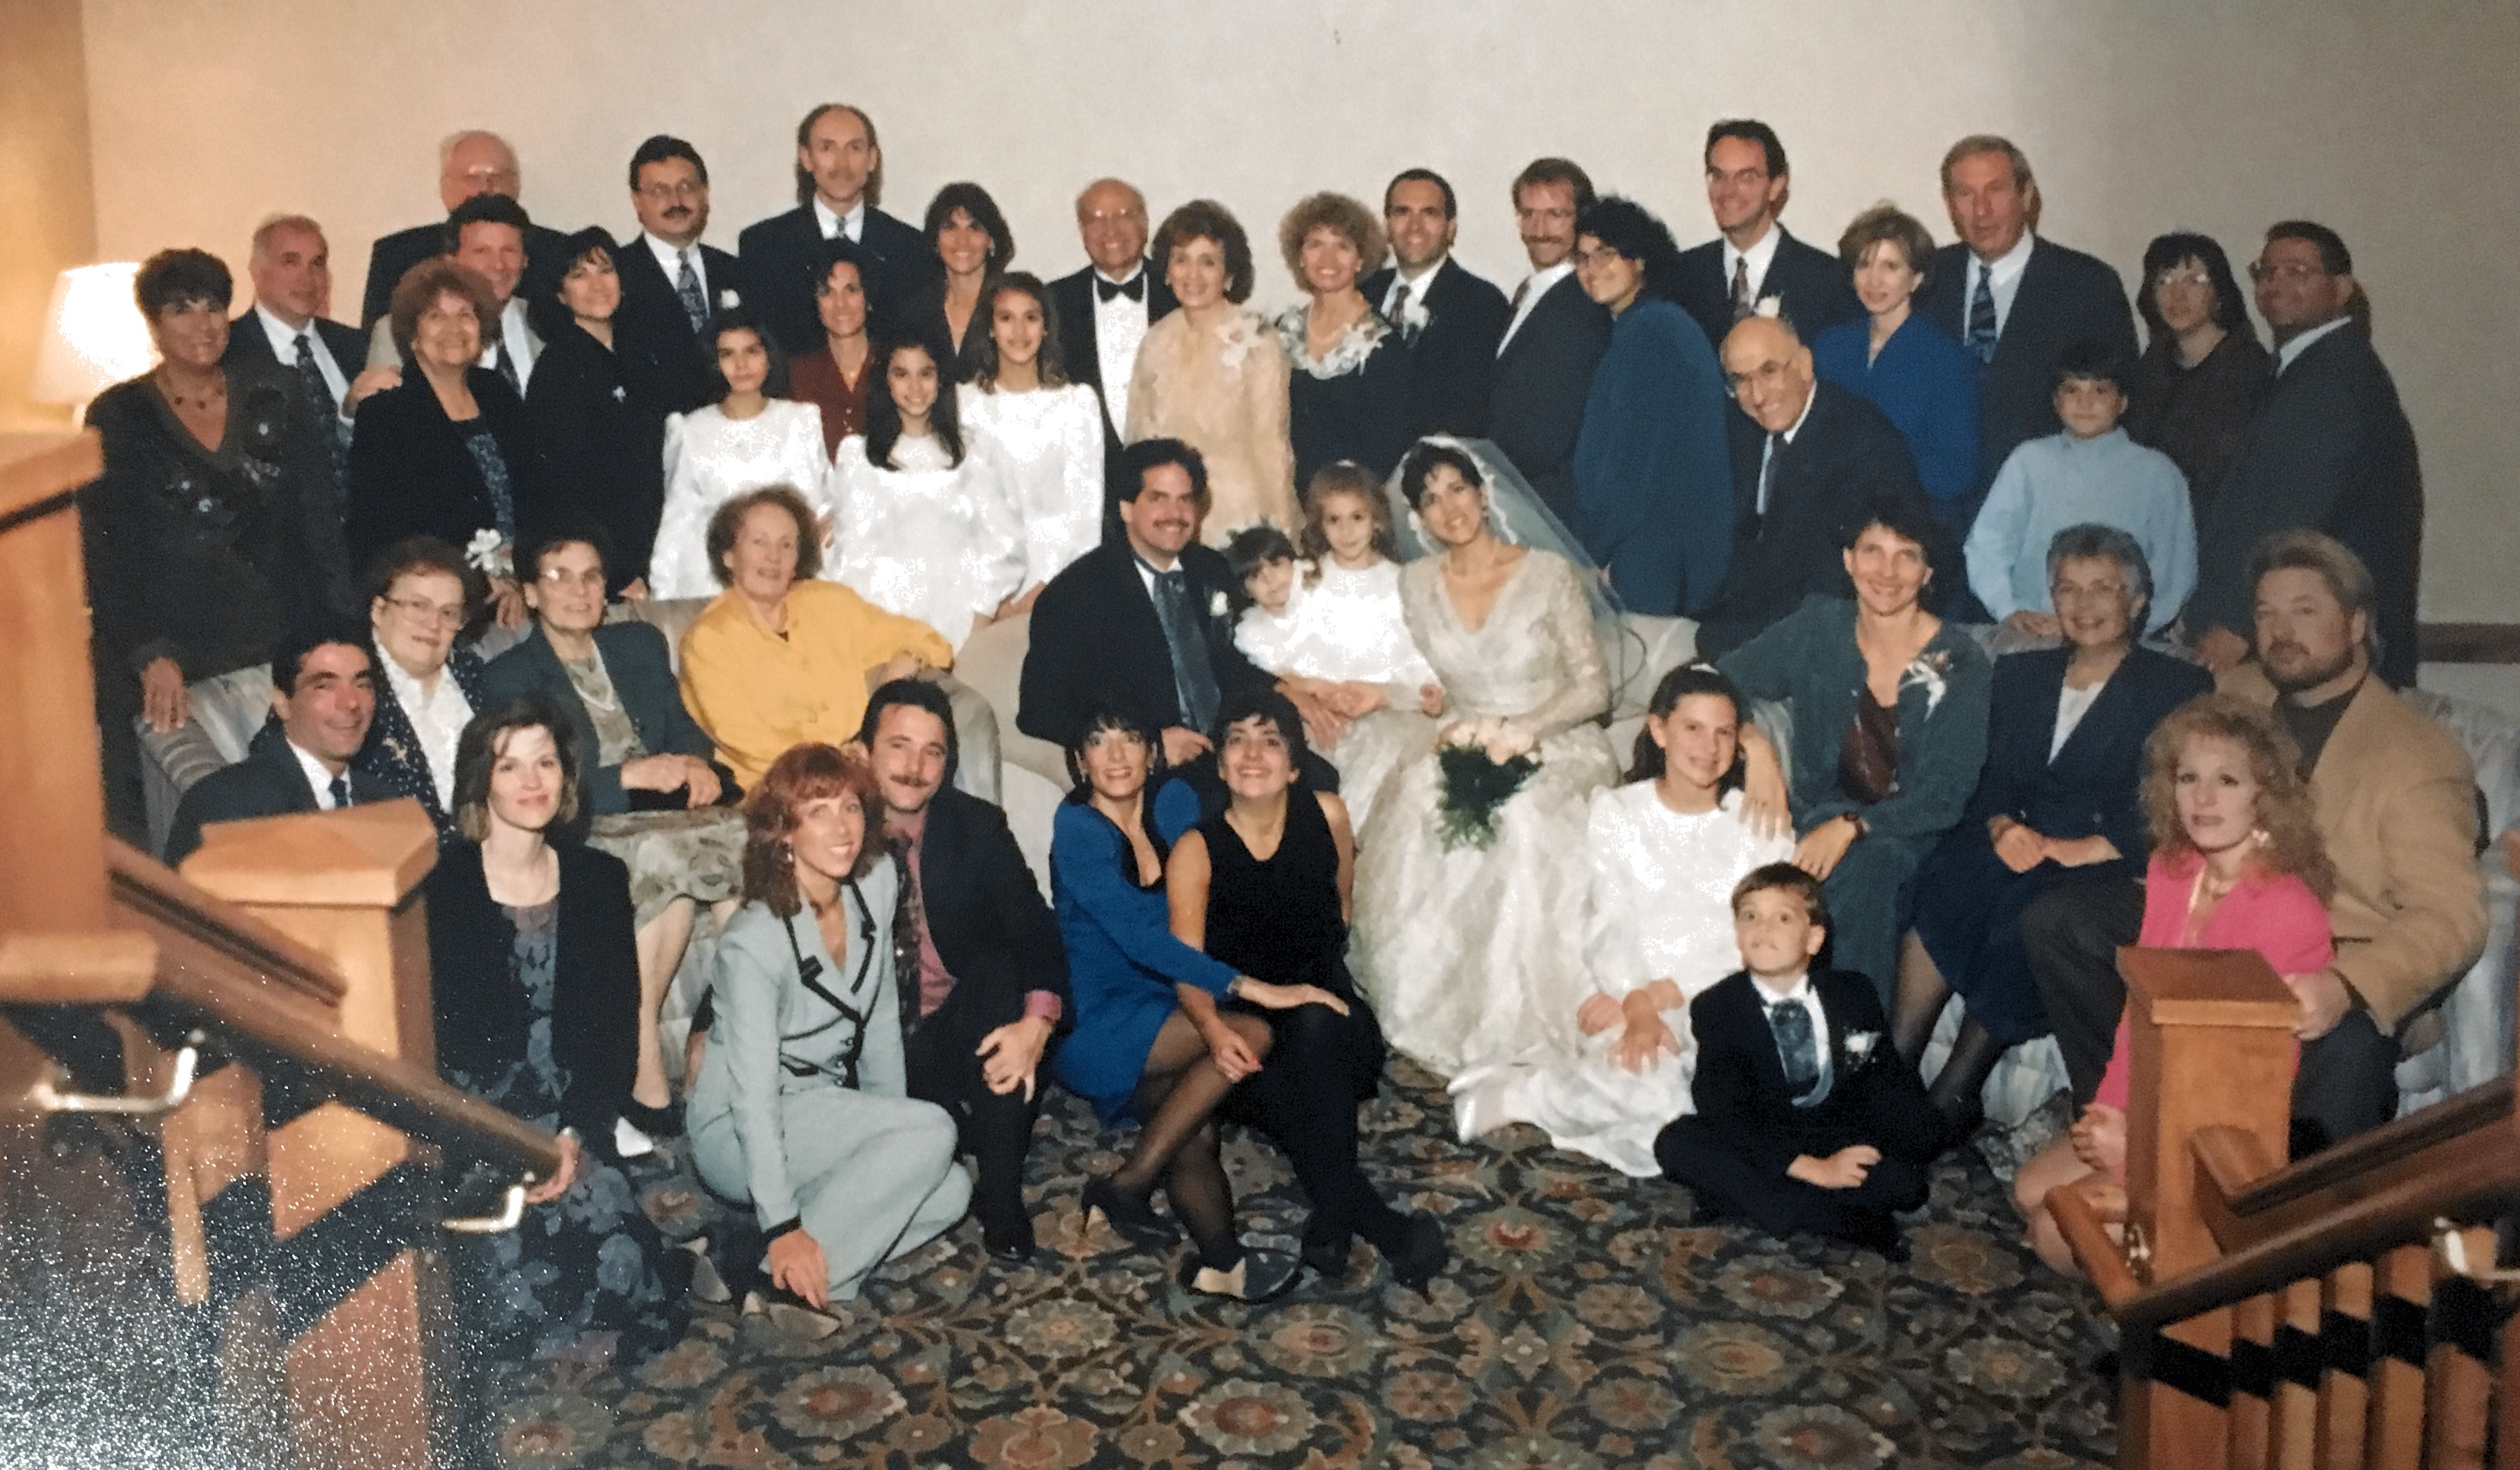 October   1996     Wedding                 Joni m Iole    To Ron Howard      In   Denver    Colorado      Wedding gown worn by brides mom   In 1952    Beautiful  day   Many friends  and family attended (from many locations 💐💖💖)lovely  bridal party 